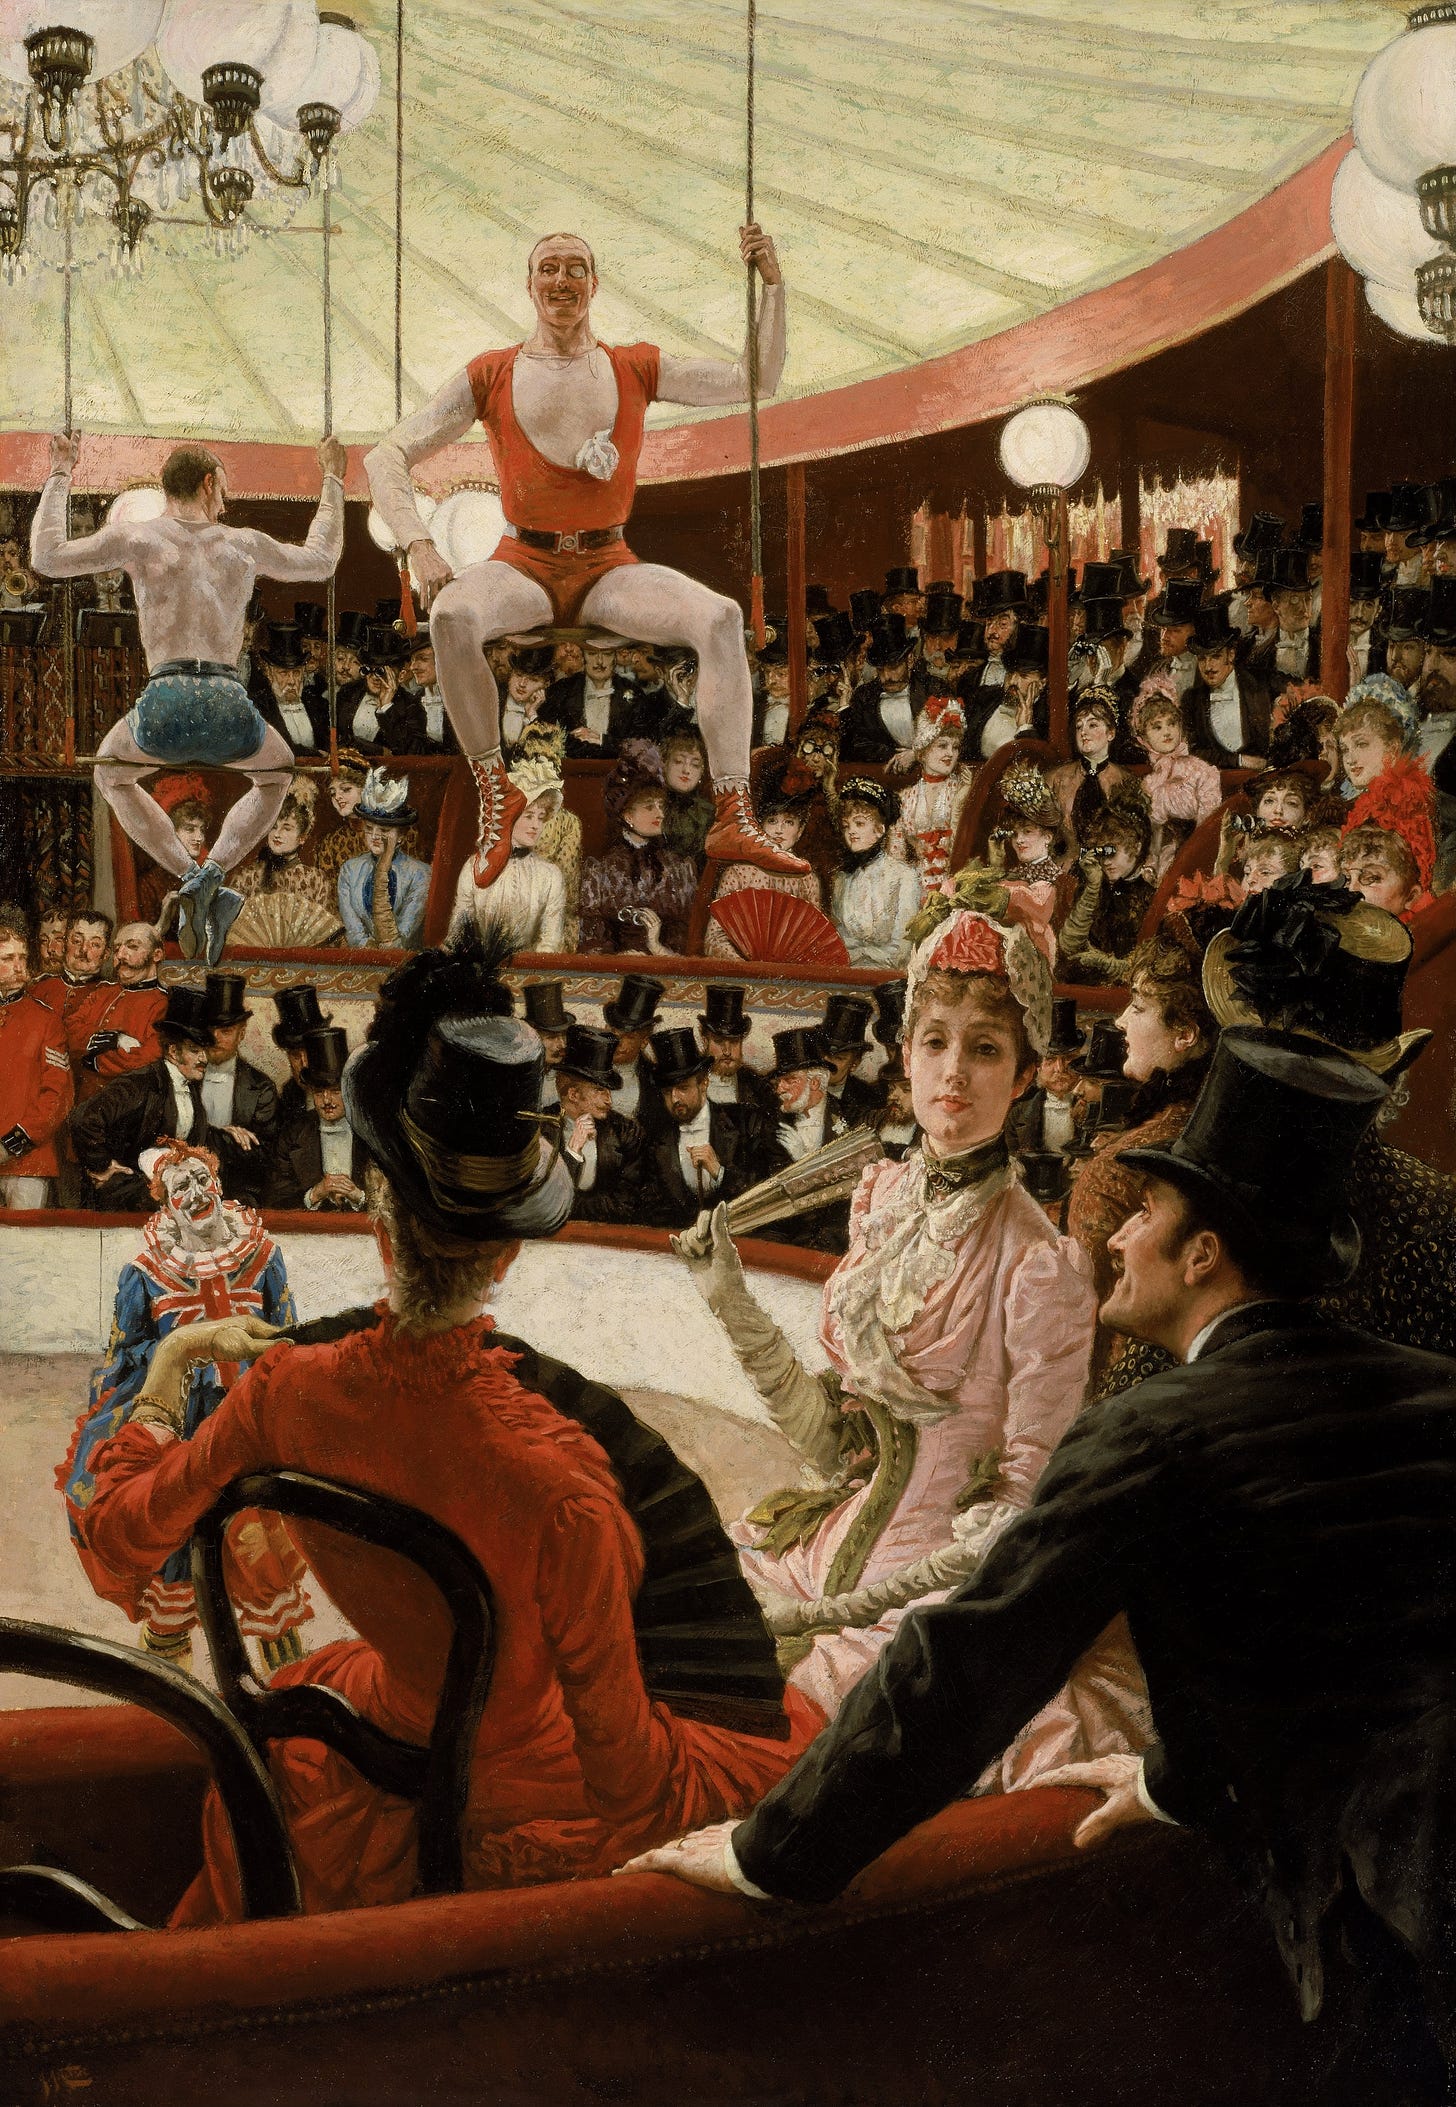 Women Of Paris- The Circus Lover (1885) by James Tissot